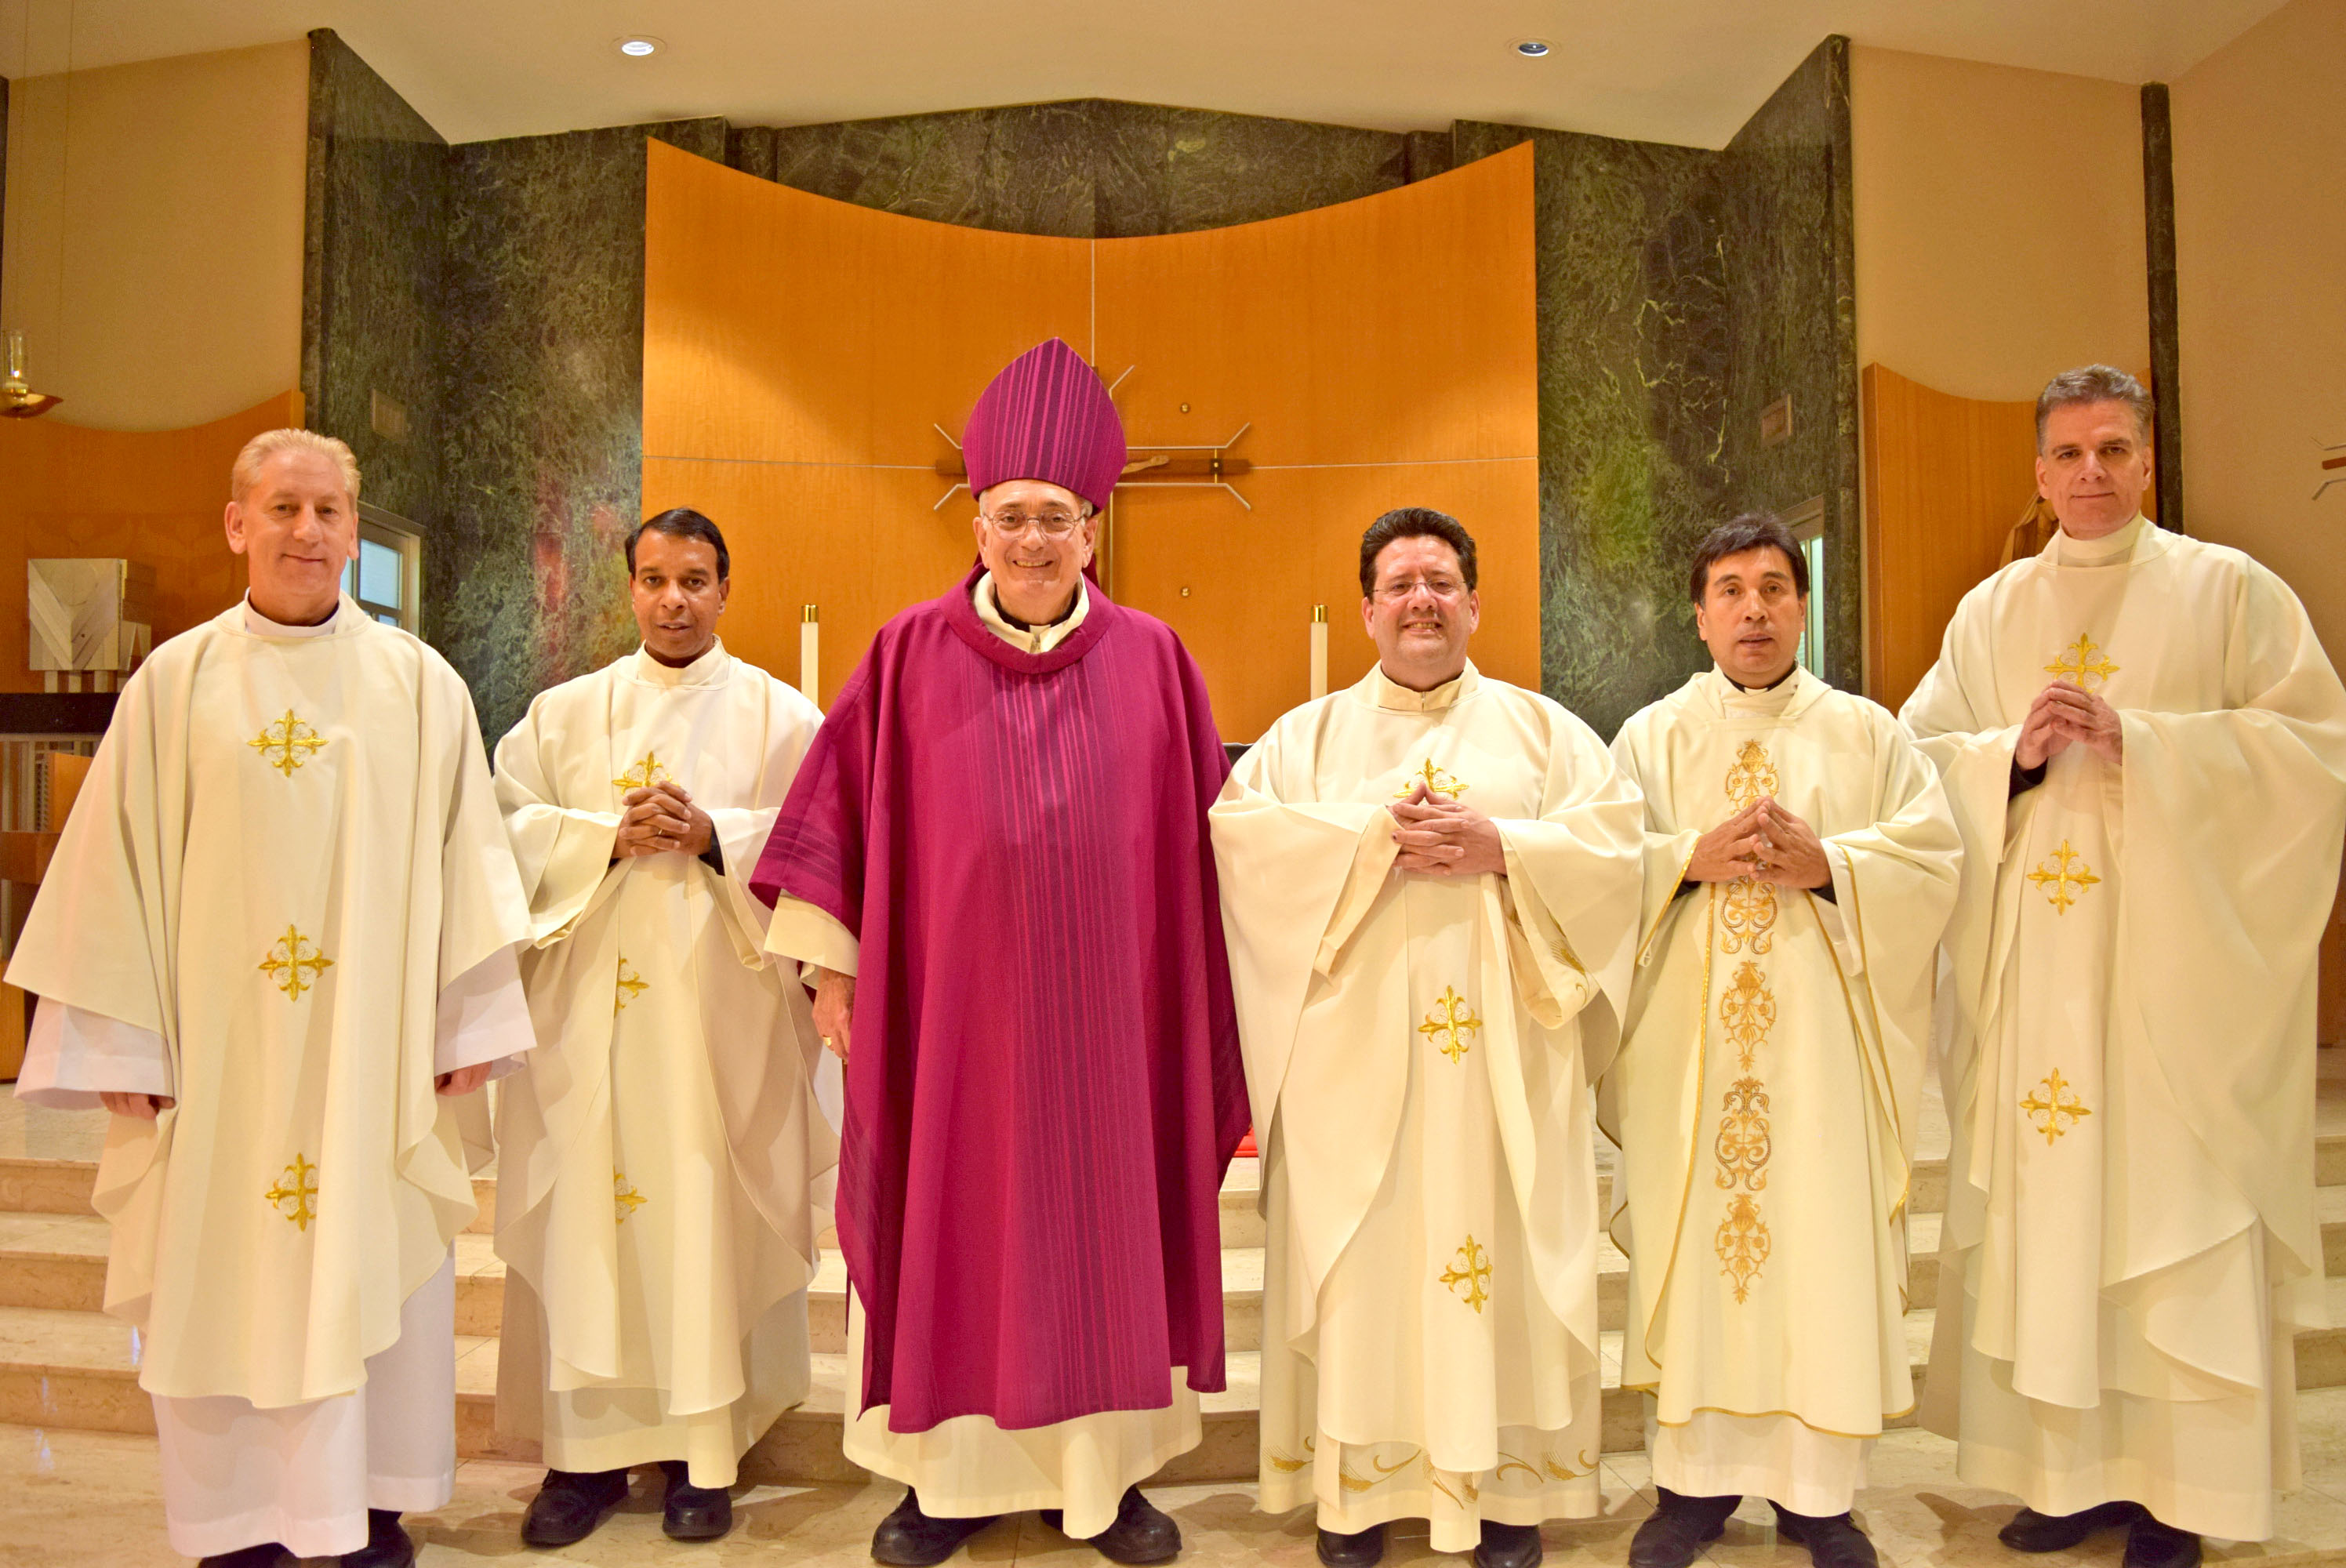 five-officially-join-ranks-as-priests-of-brooklyn-diocese-the-tablet